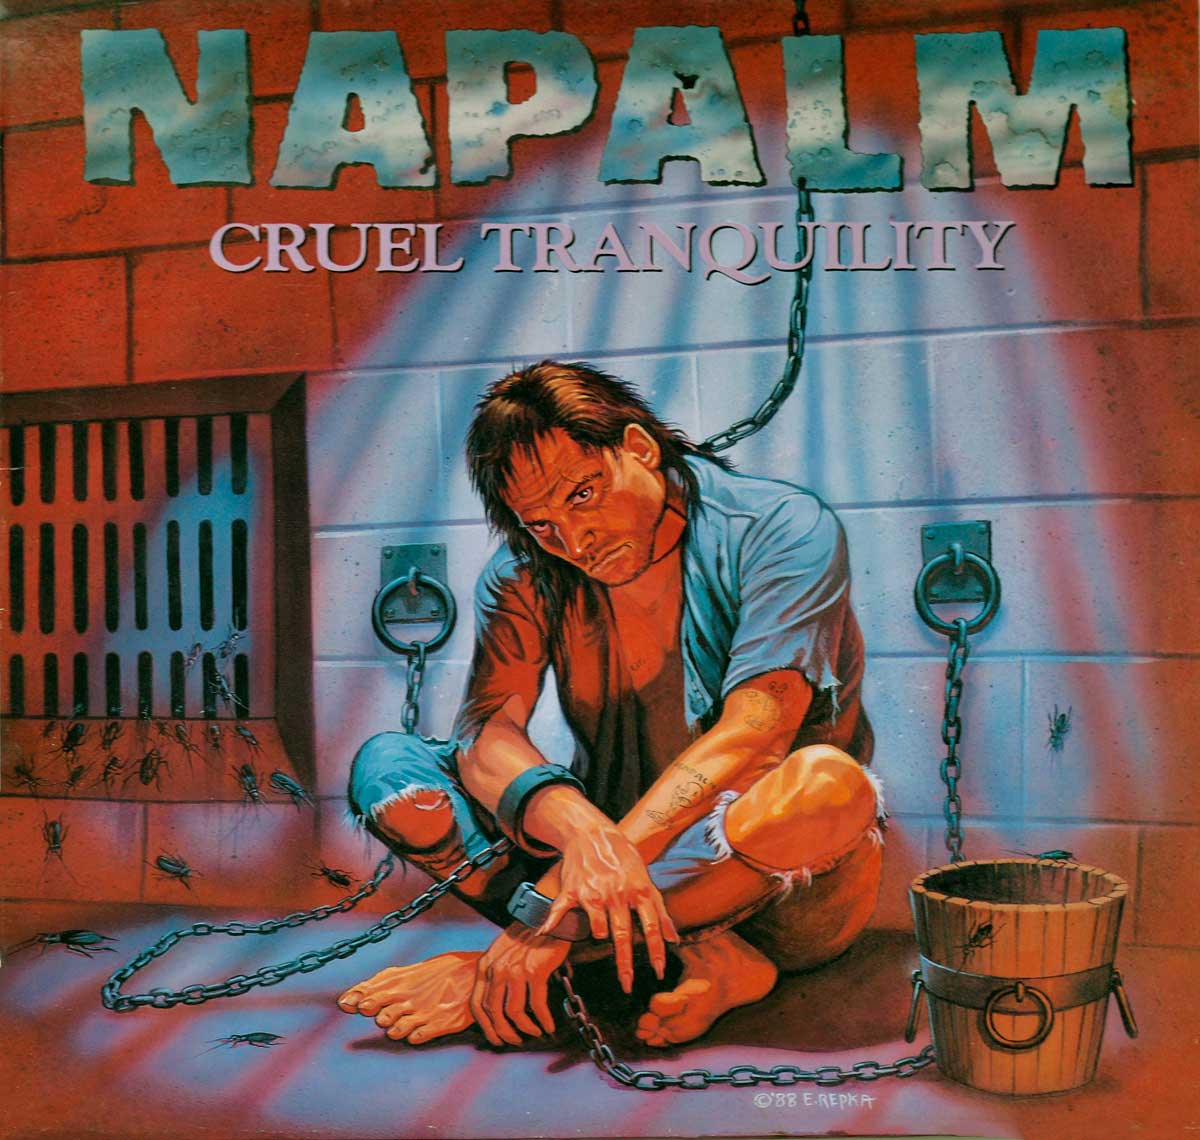 Napalm Cruel Tranquility Is The First Official Full Length Album By The